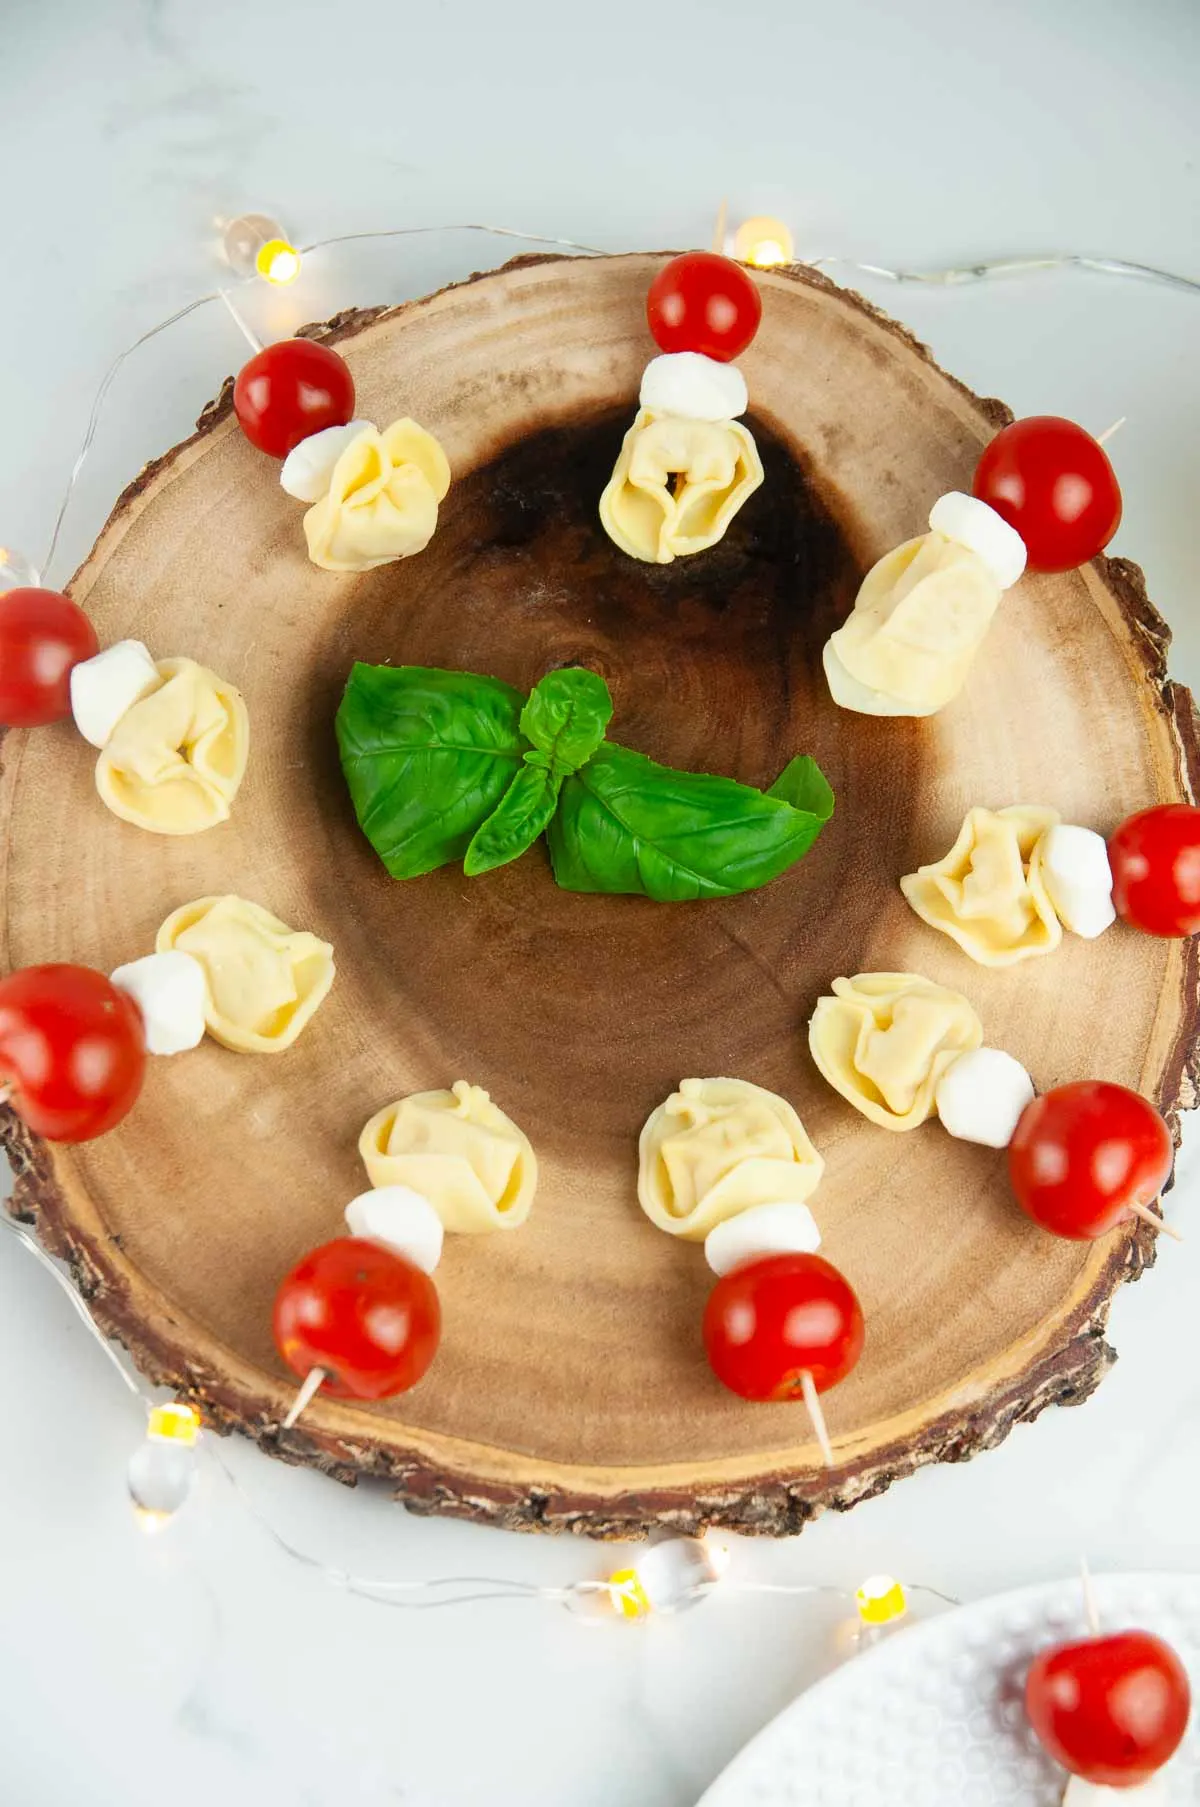 Tortellini Caprese Skewers arranged on a wooden platter without balsamic drizzle or pesto added.